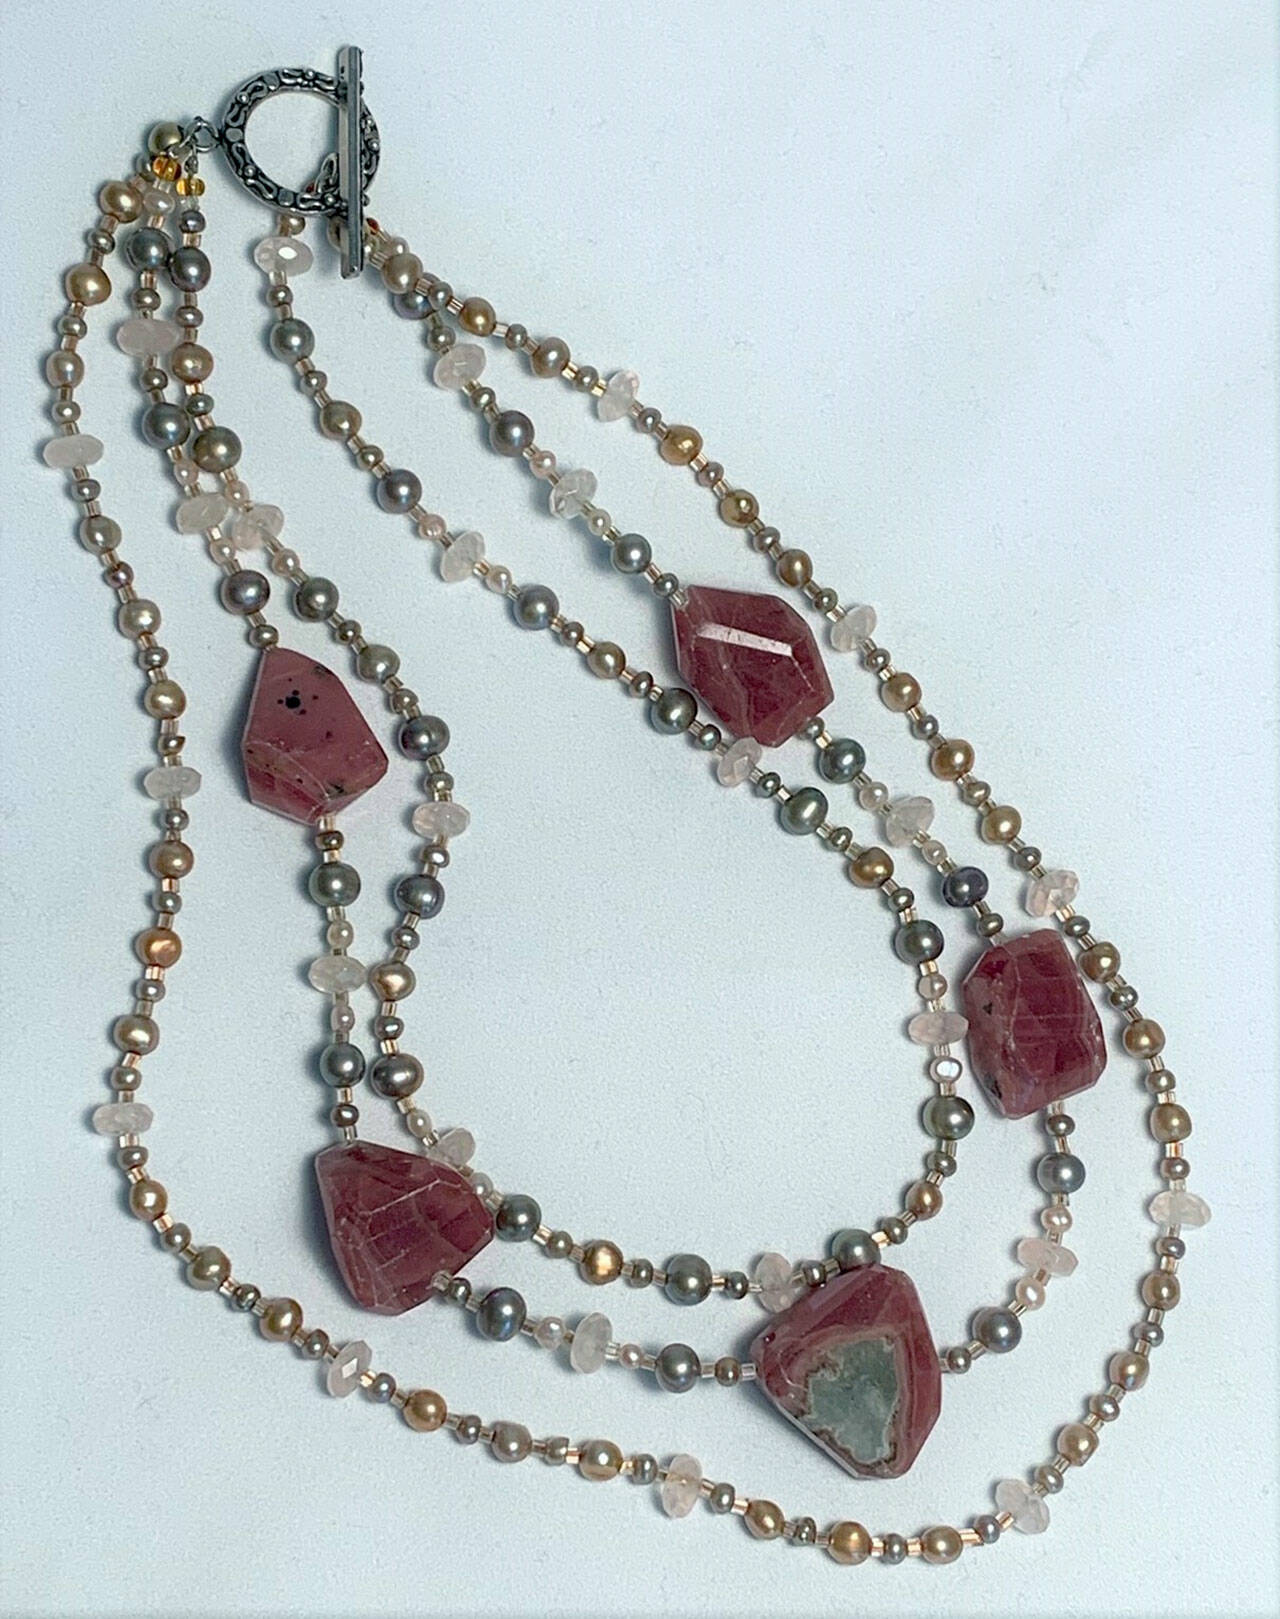 This necklace is a sample of the work by the Port Ludlow Art League’s jeweler of the month Beth Olson.